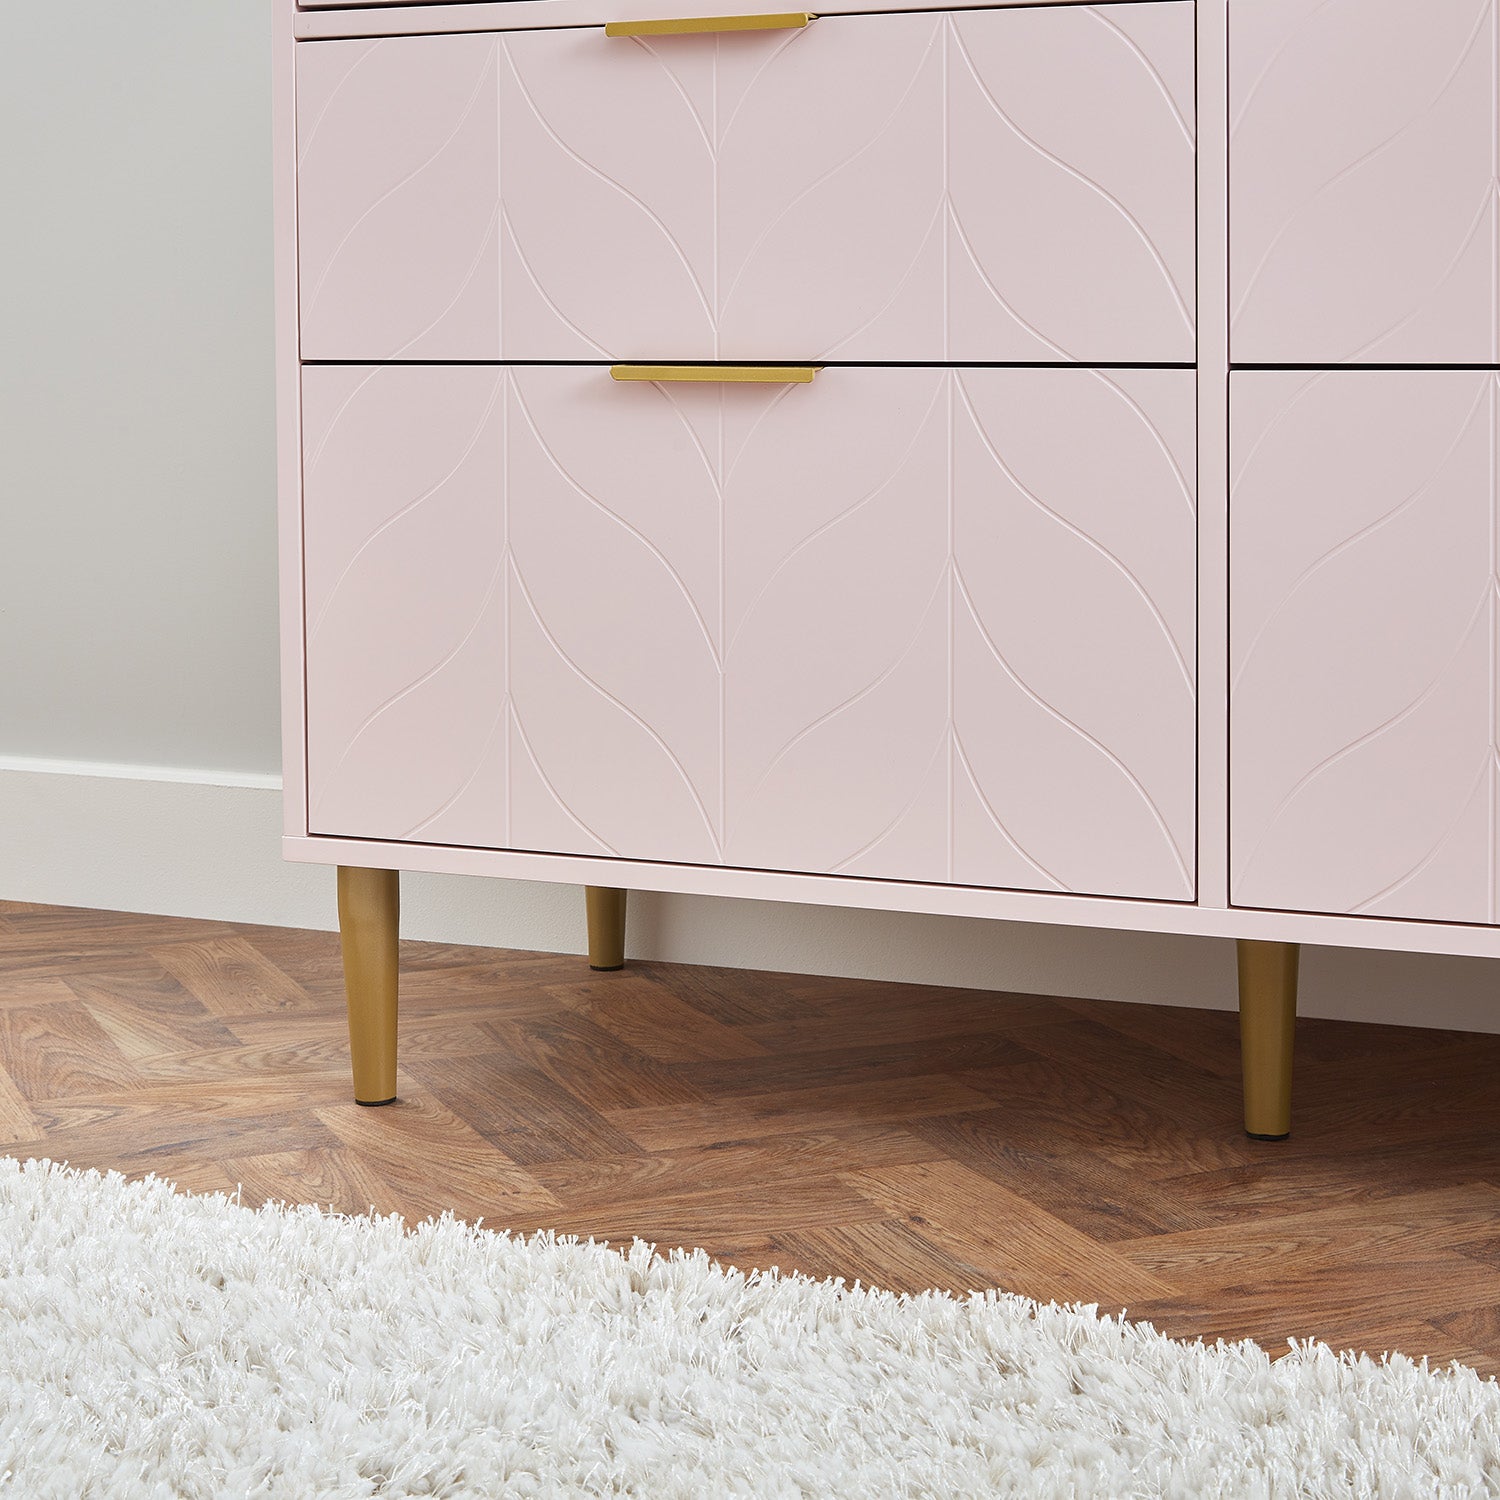 Gloria chest of drawers - 4 over 4 - pale pink & brass effect - laura James